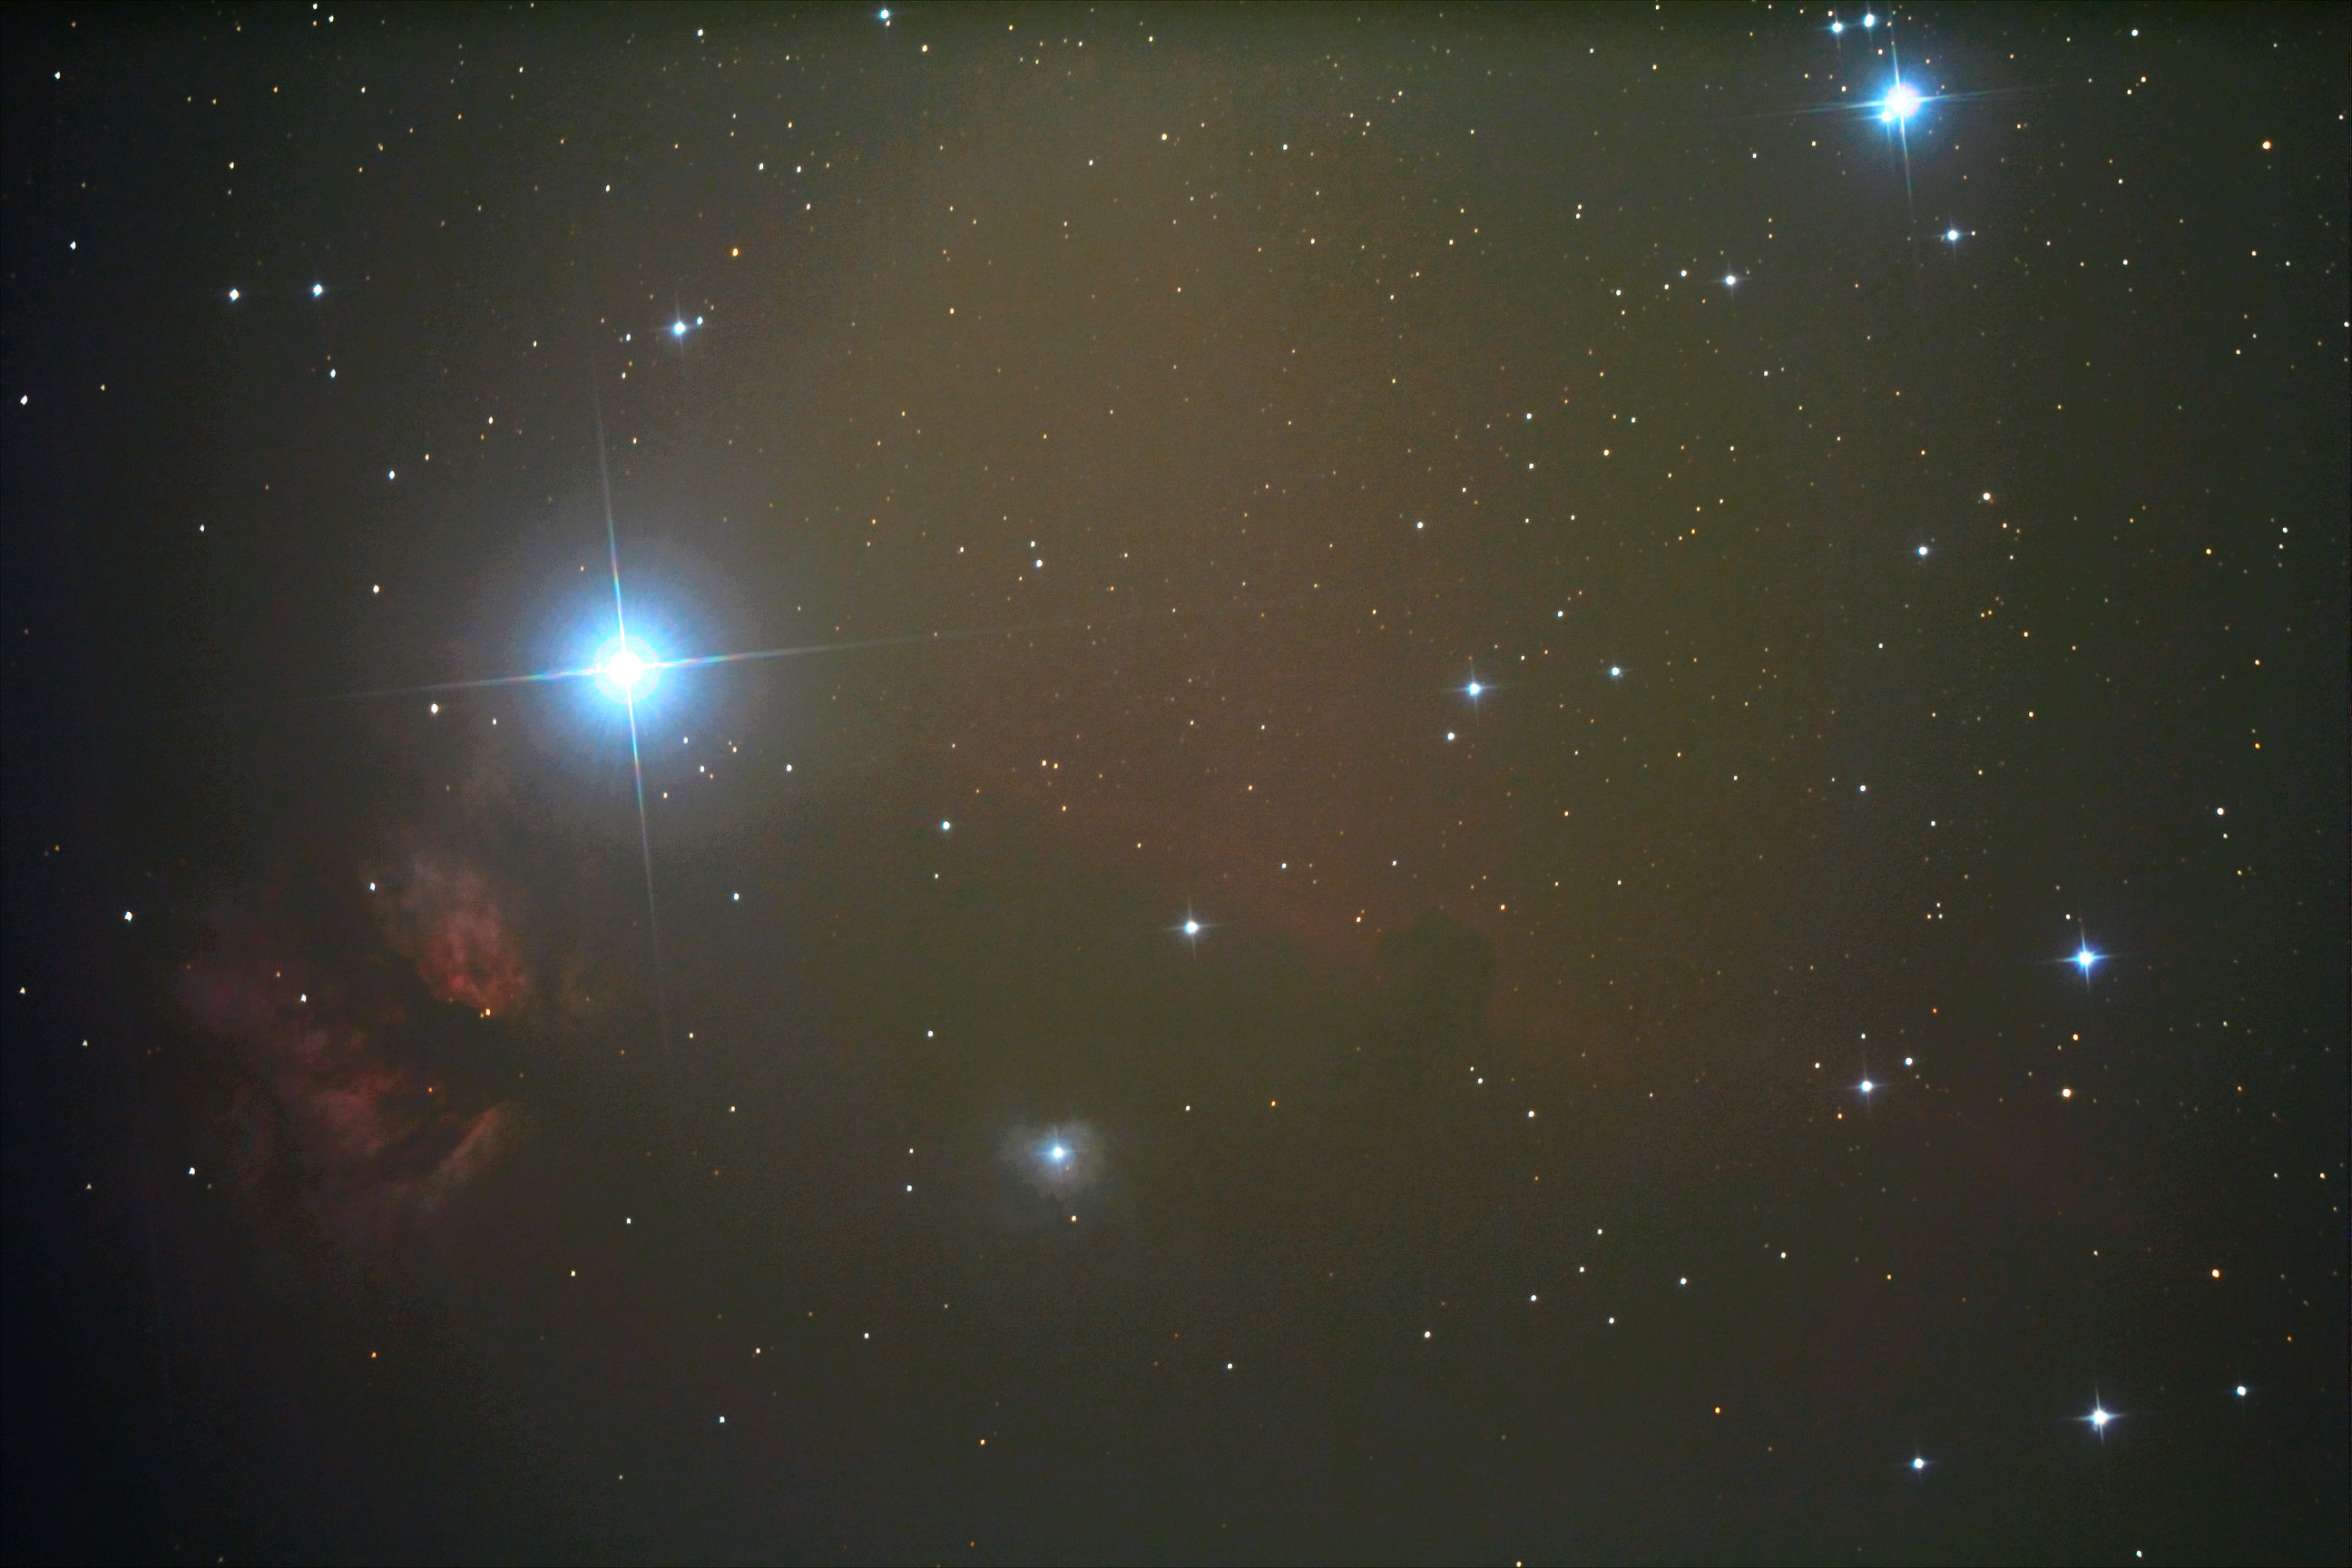 Horsehead and Flame 2-15-2015 image